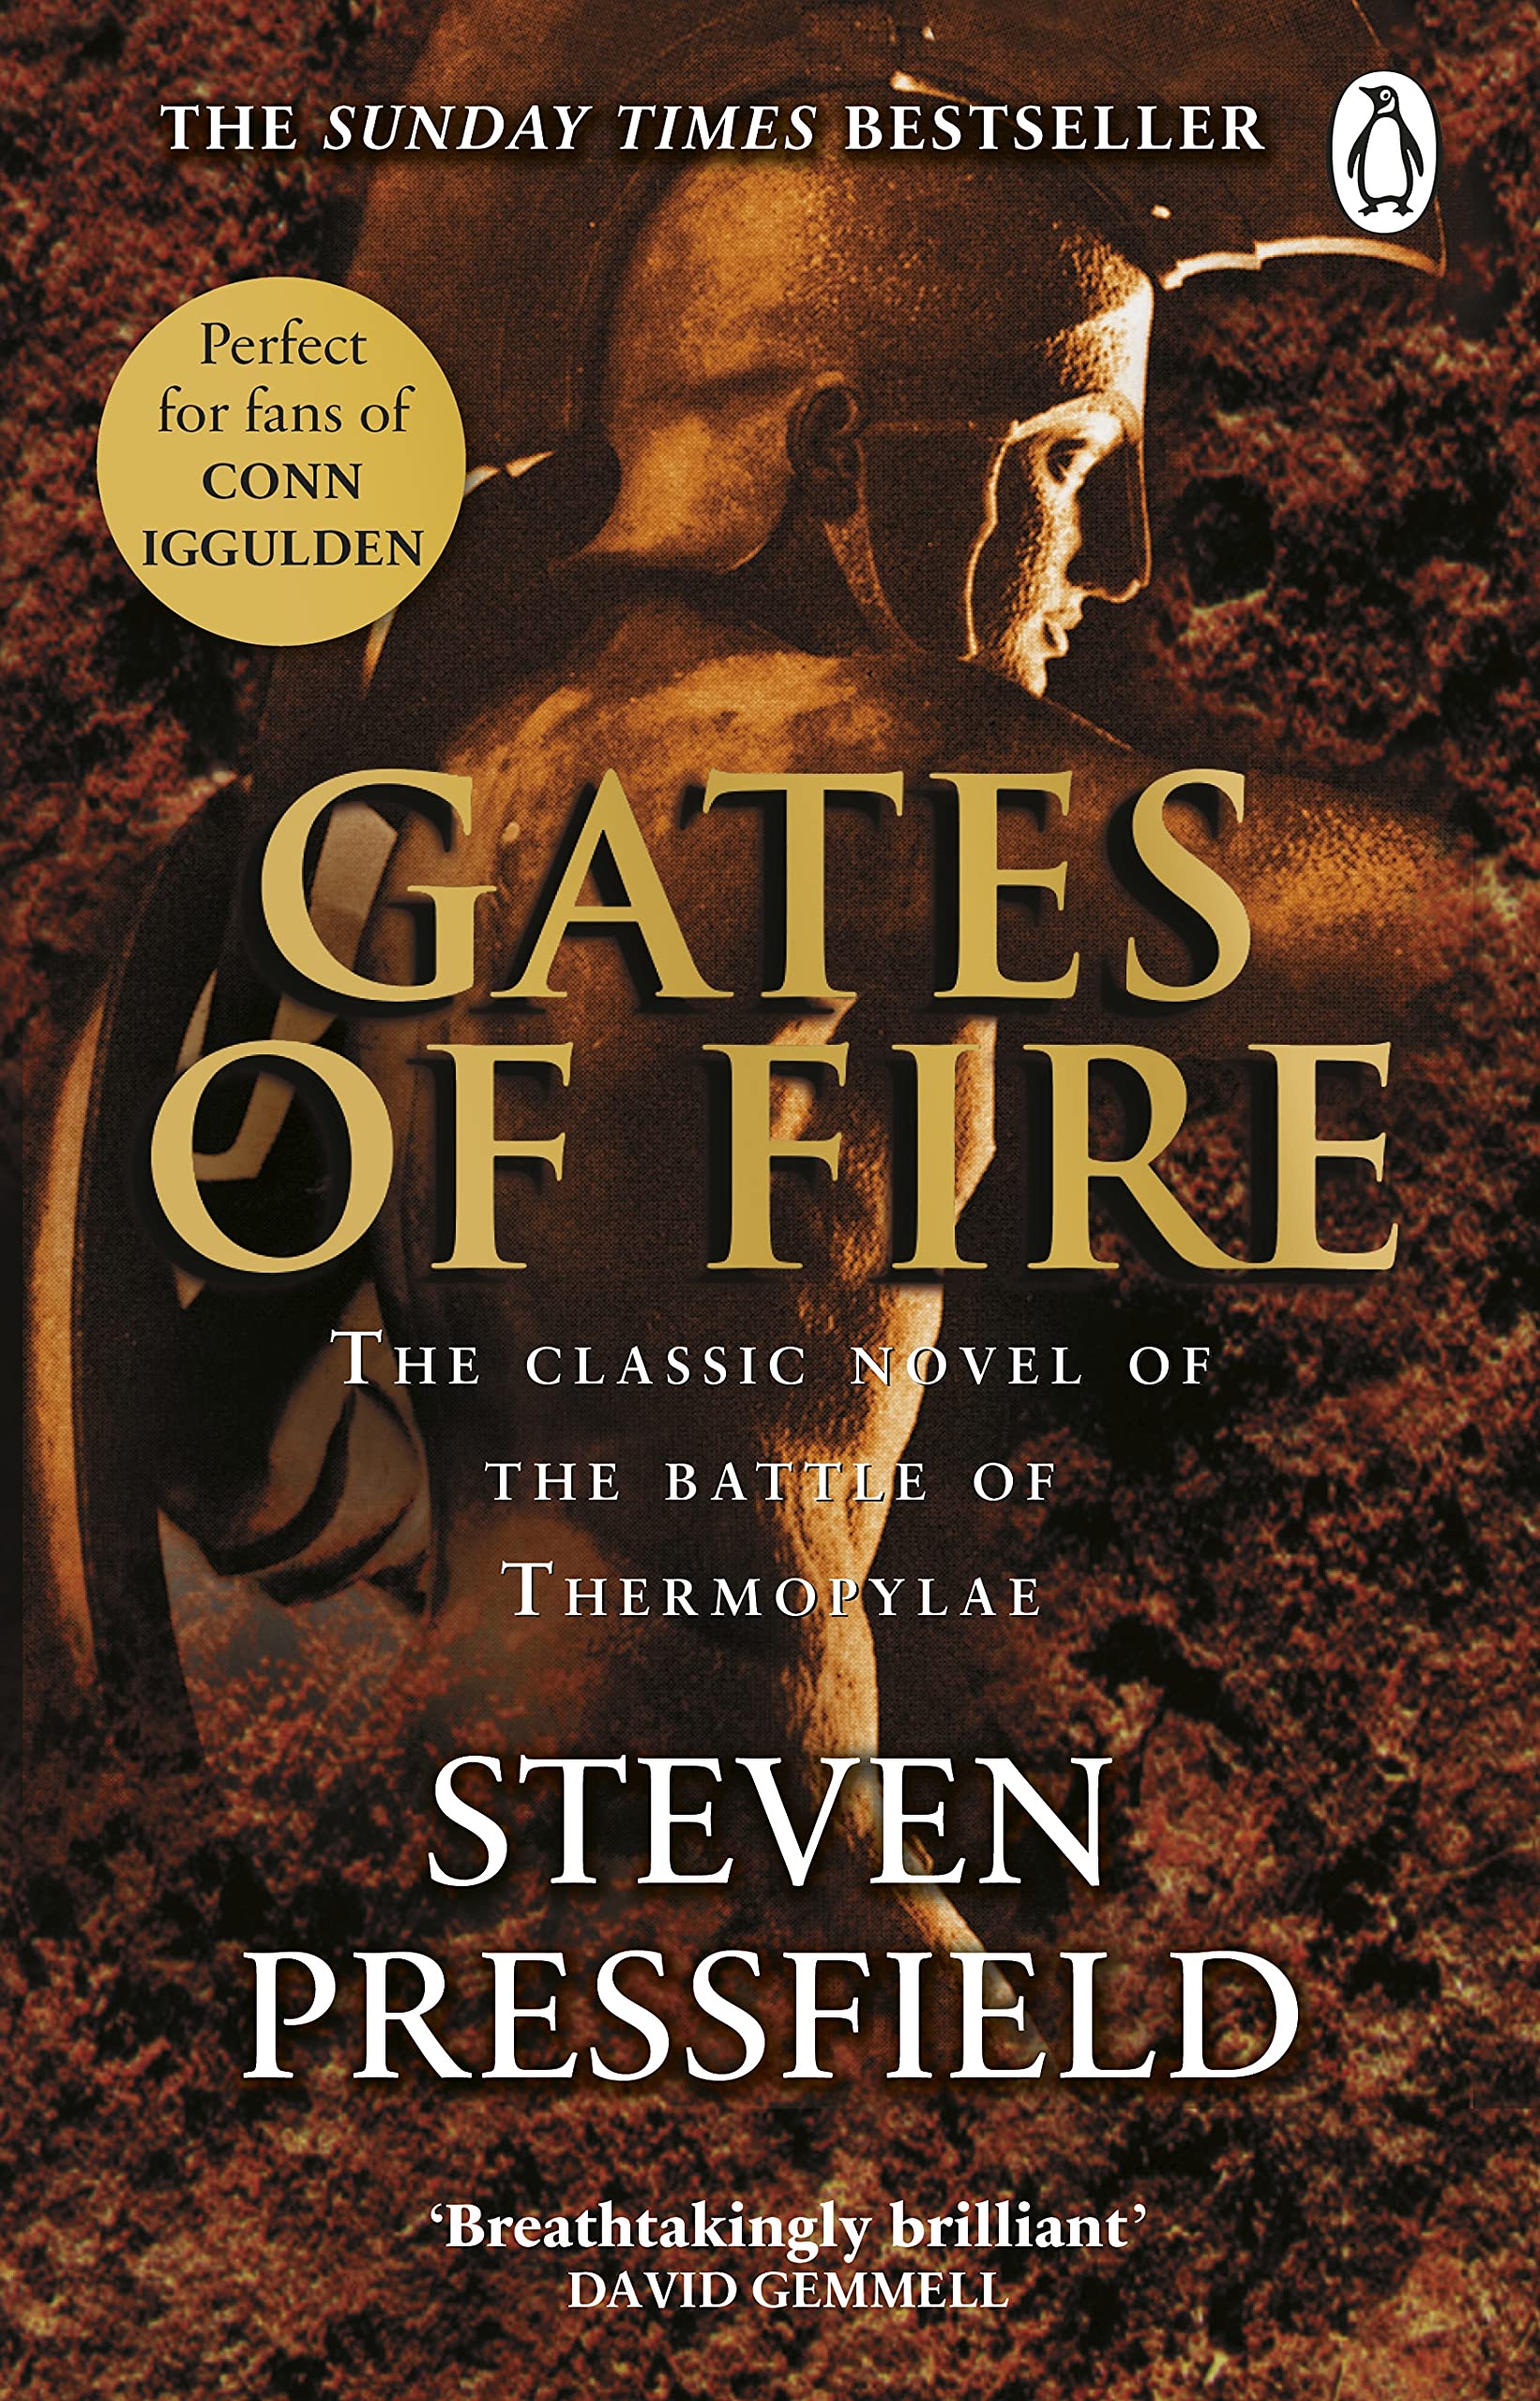 GATES OF FIRE AN EPIC NOVEL OF THE BATTLE OF THERMOPYLAE PB